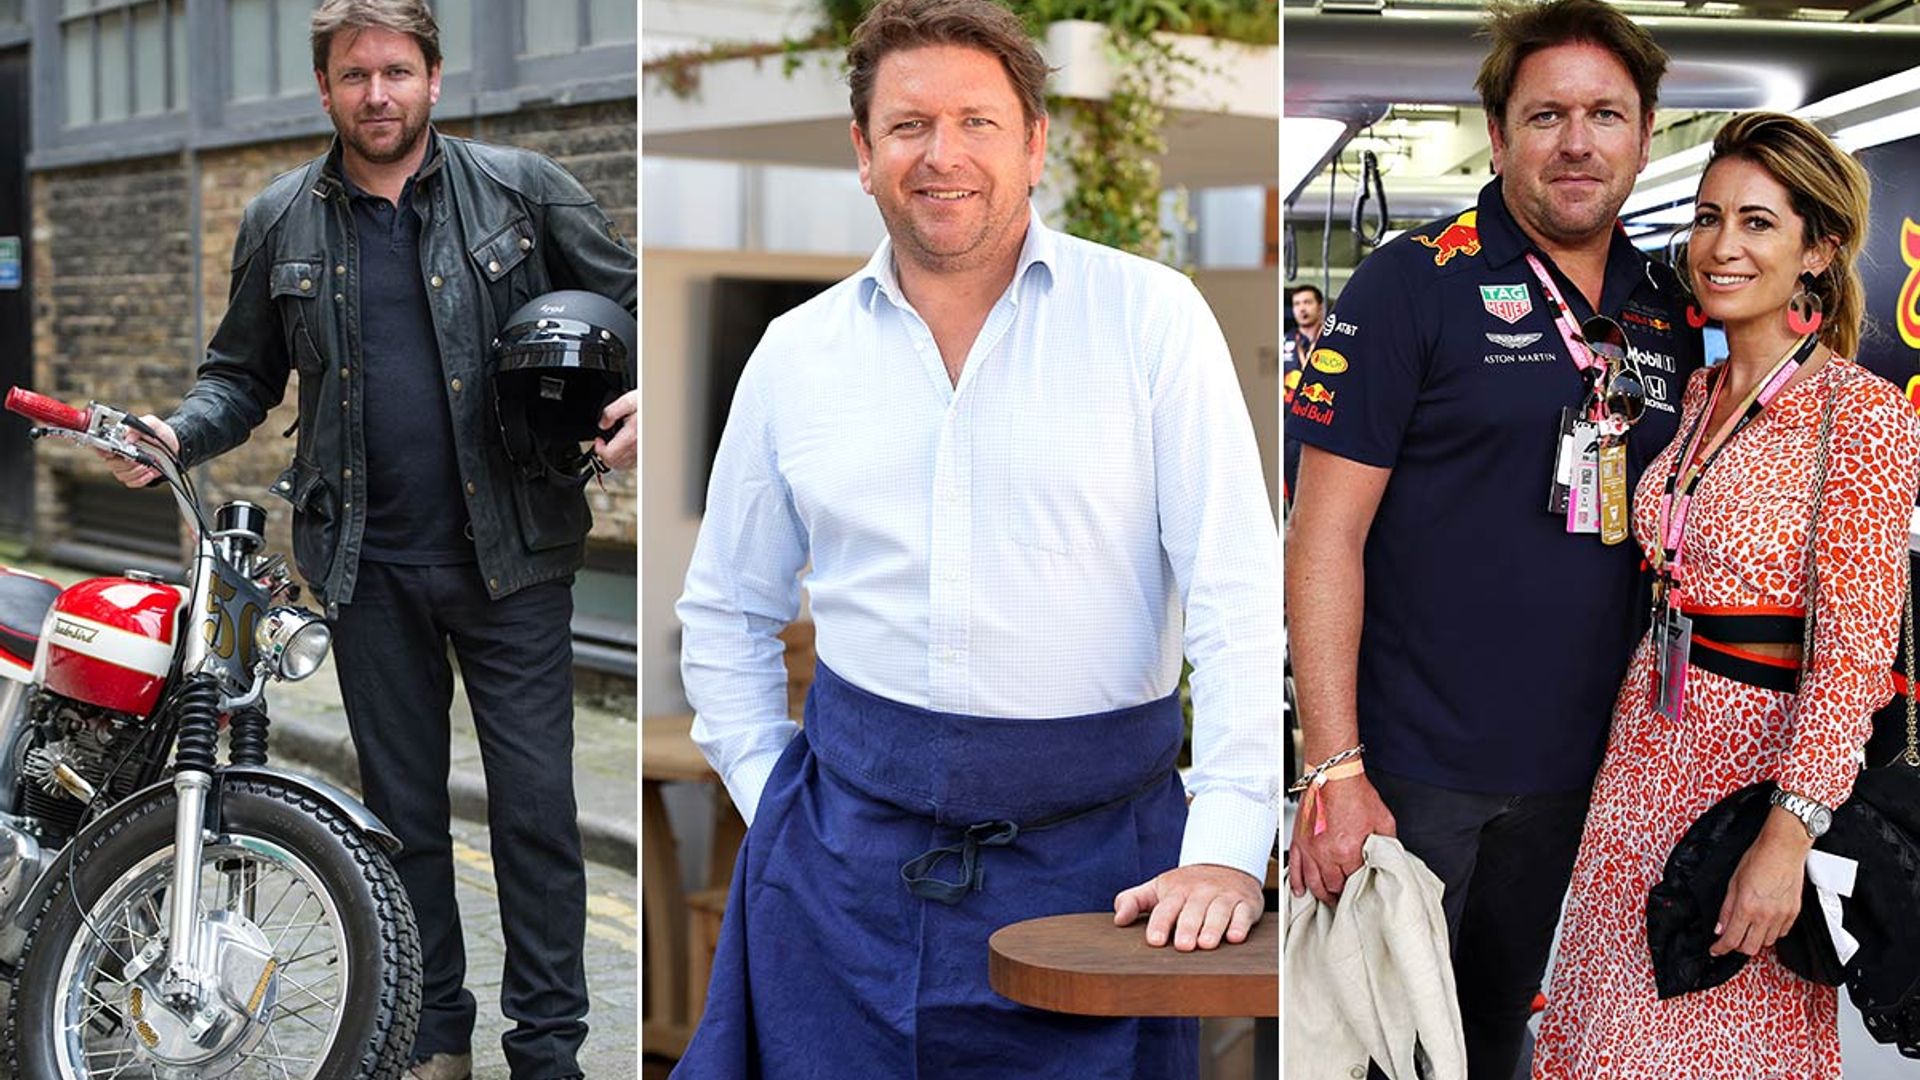 Celebrity chef James Martin: Everything you need to know